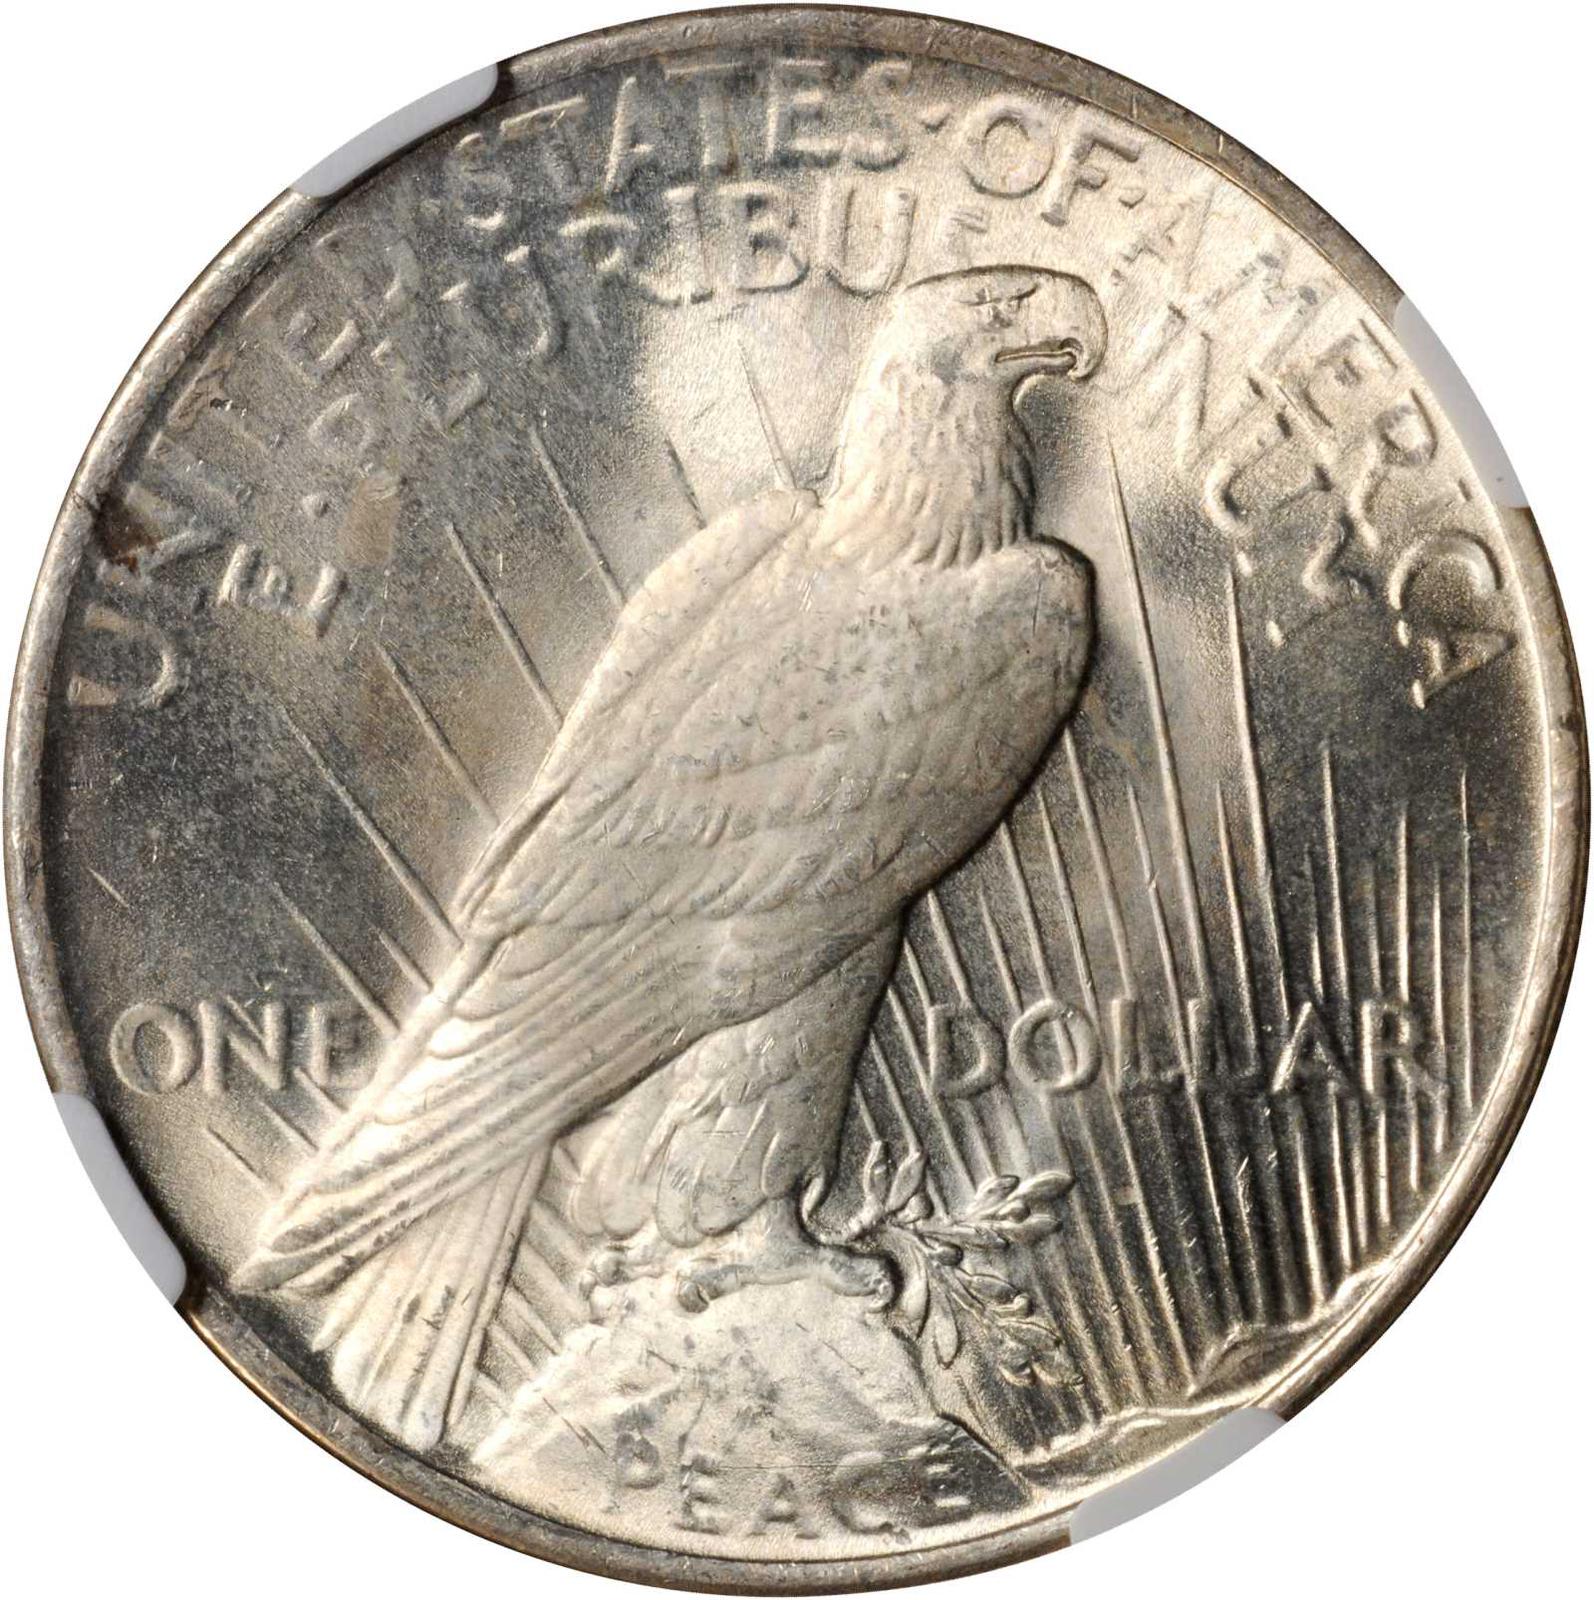 Value Of 1922 Silver Peace Dollar Rare Peace Dollar Buyer,Baked Chicken Breast Nutrition